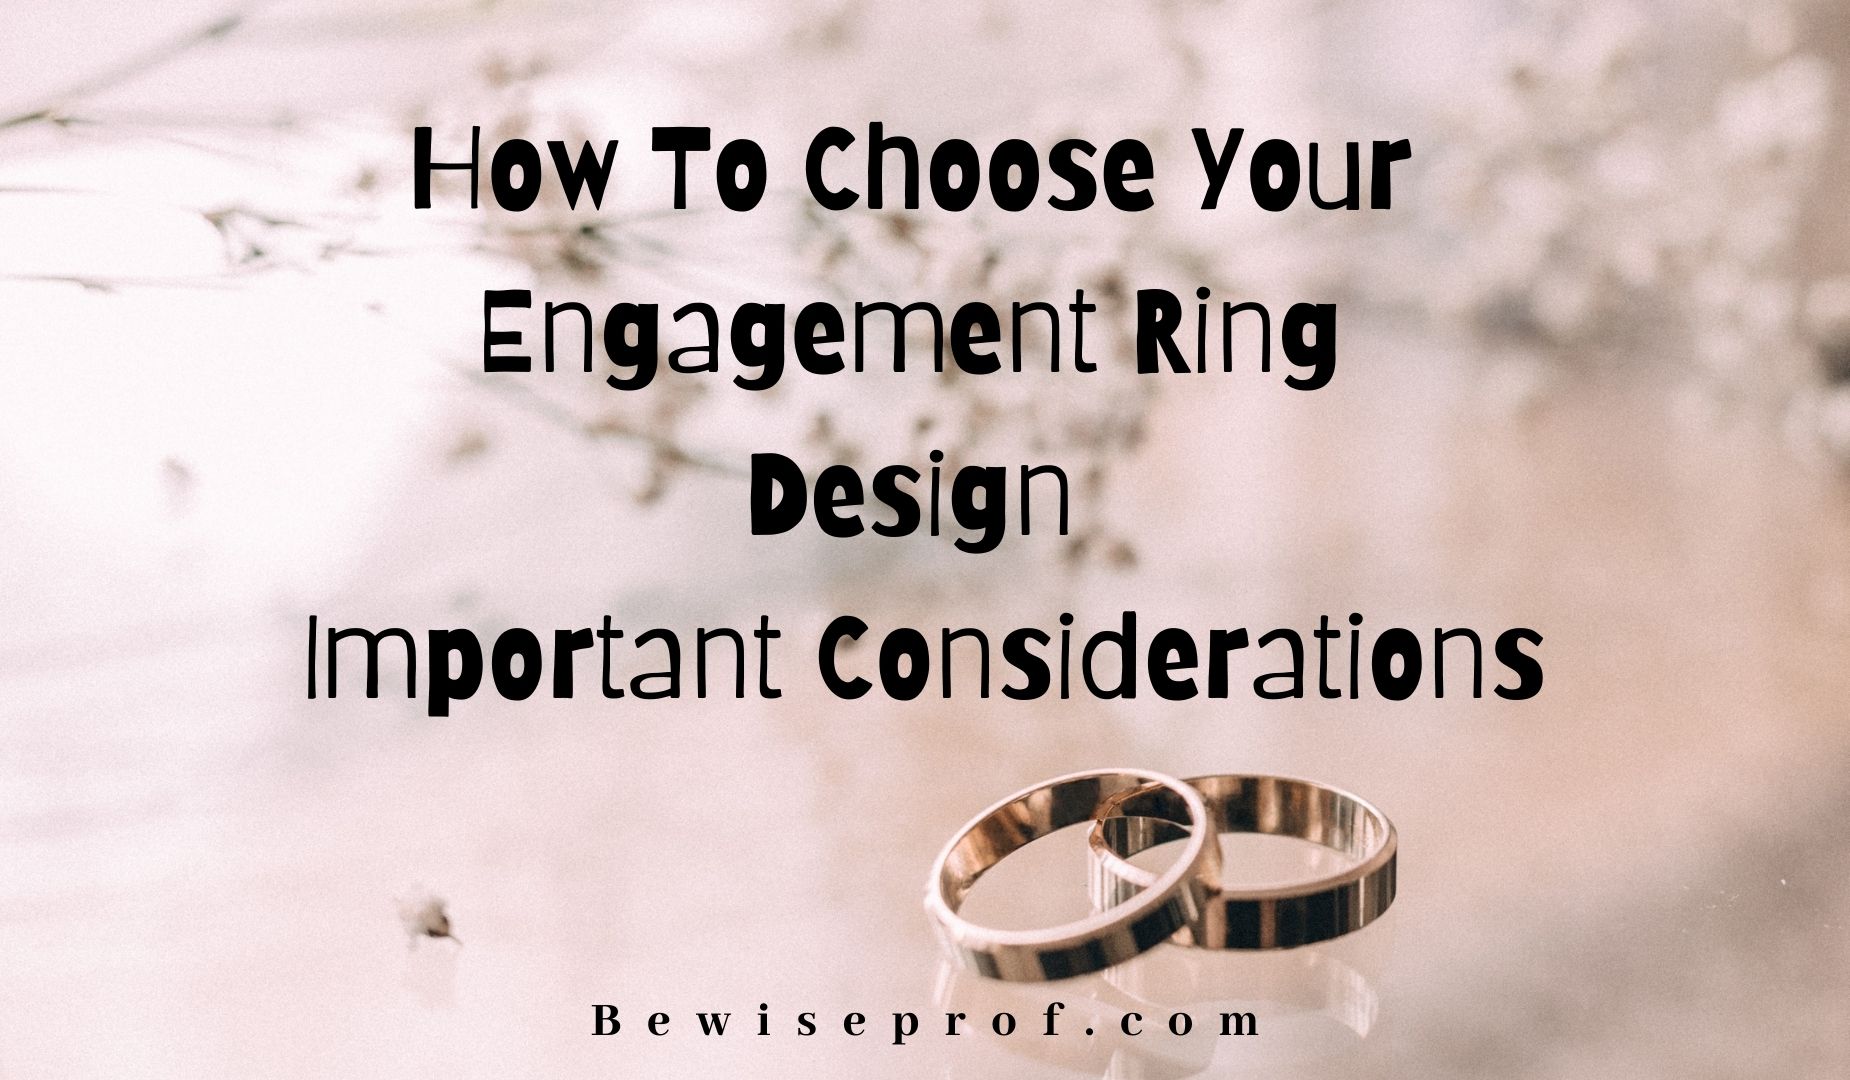 How to choose your engagement ring design- Important considerations.